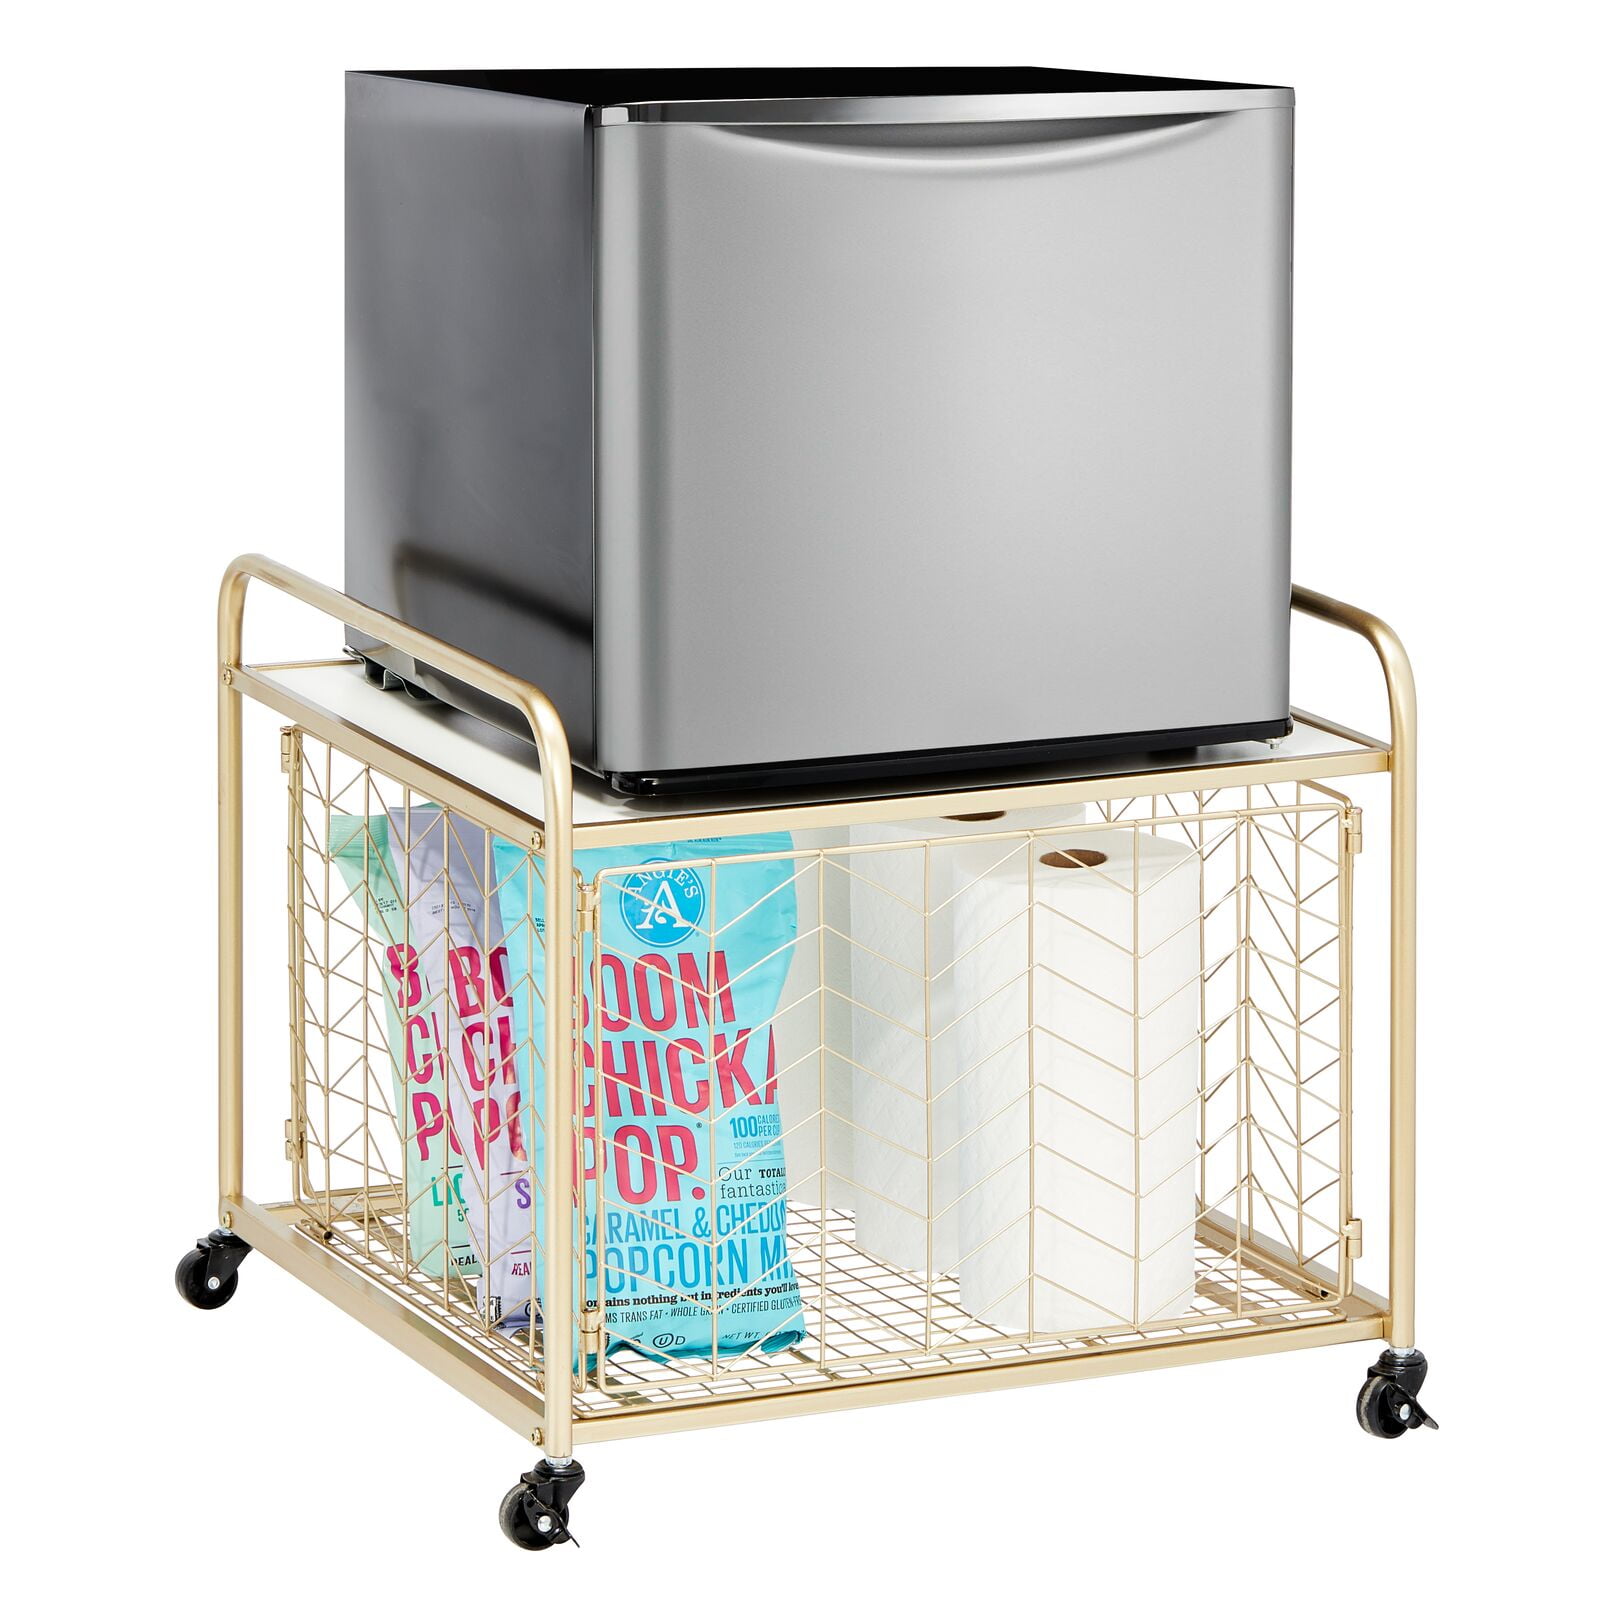  mDesign Small Portable Mini Fridge Storage Cart with Wheels and  Handles - Mobile Refrigerator, Microwave, Appliance Platform Table with  Drawer Basket for Dorm Room, Studio, Apartments - Black : Home & Kitchen